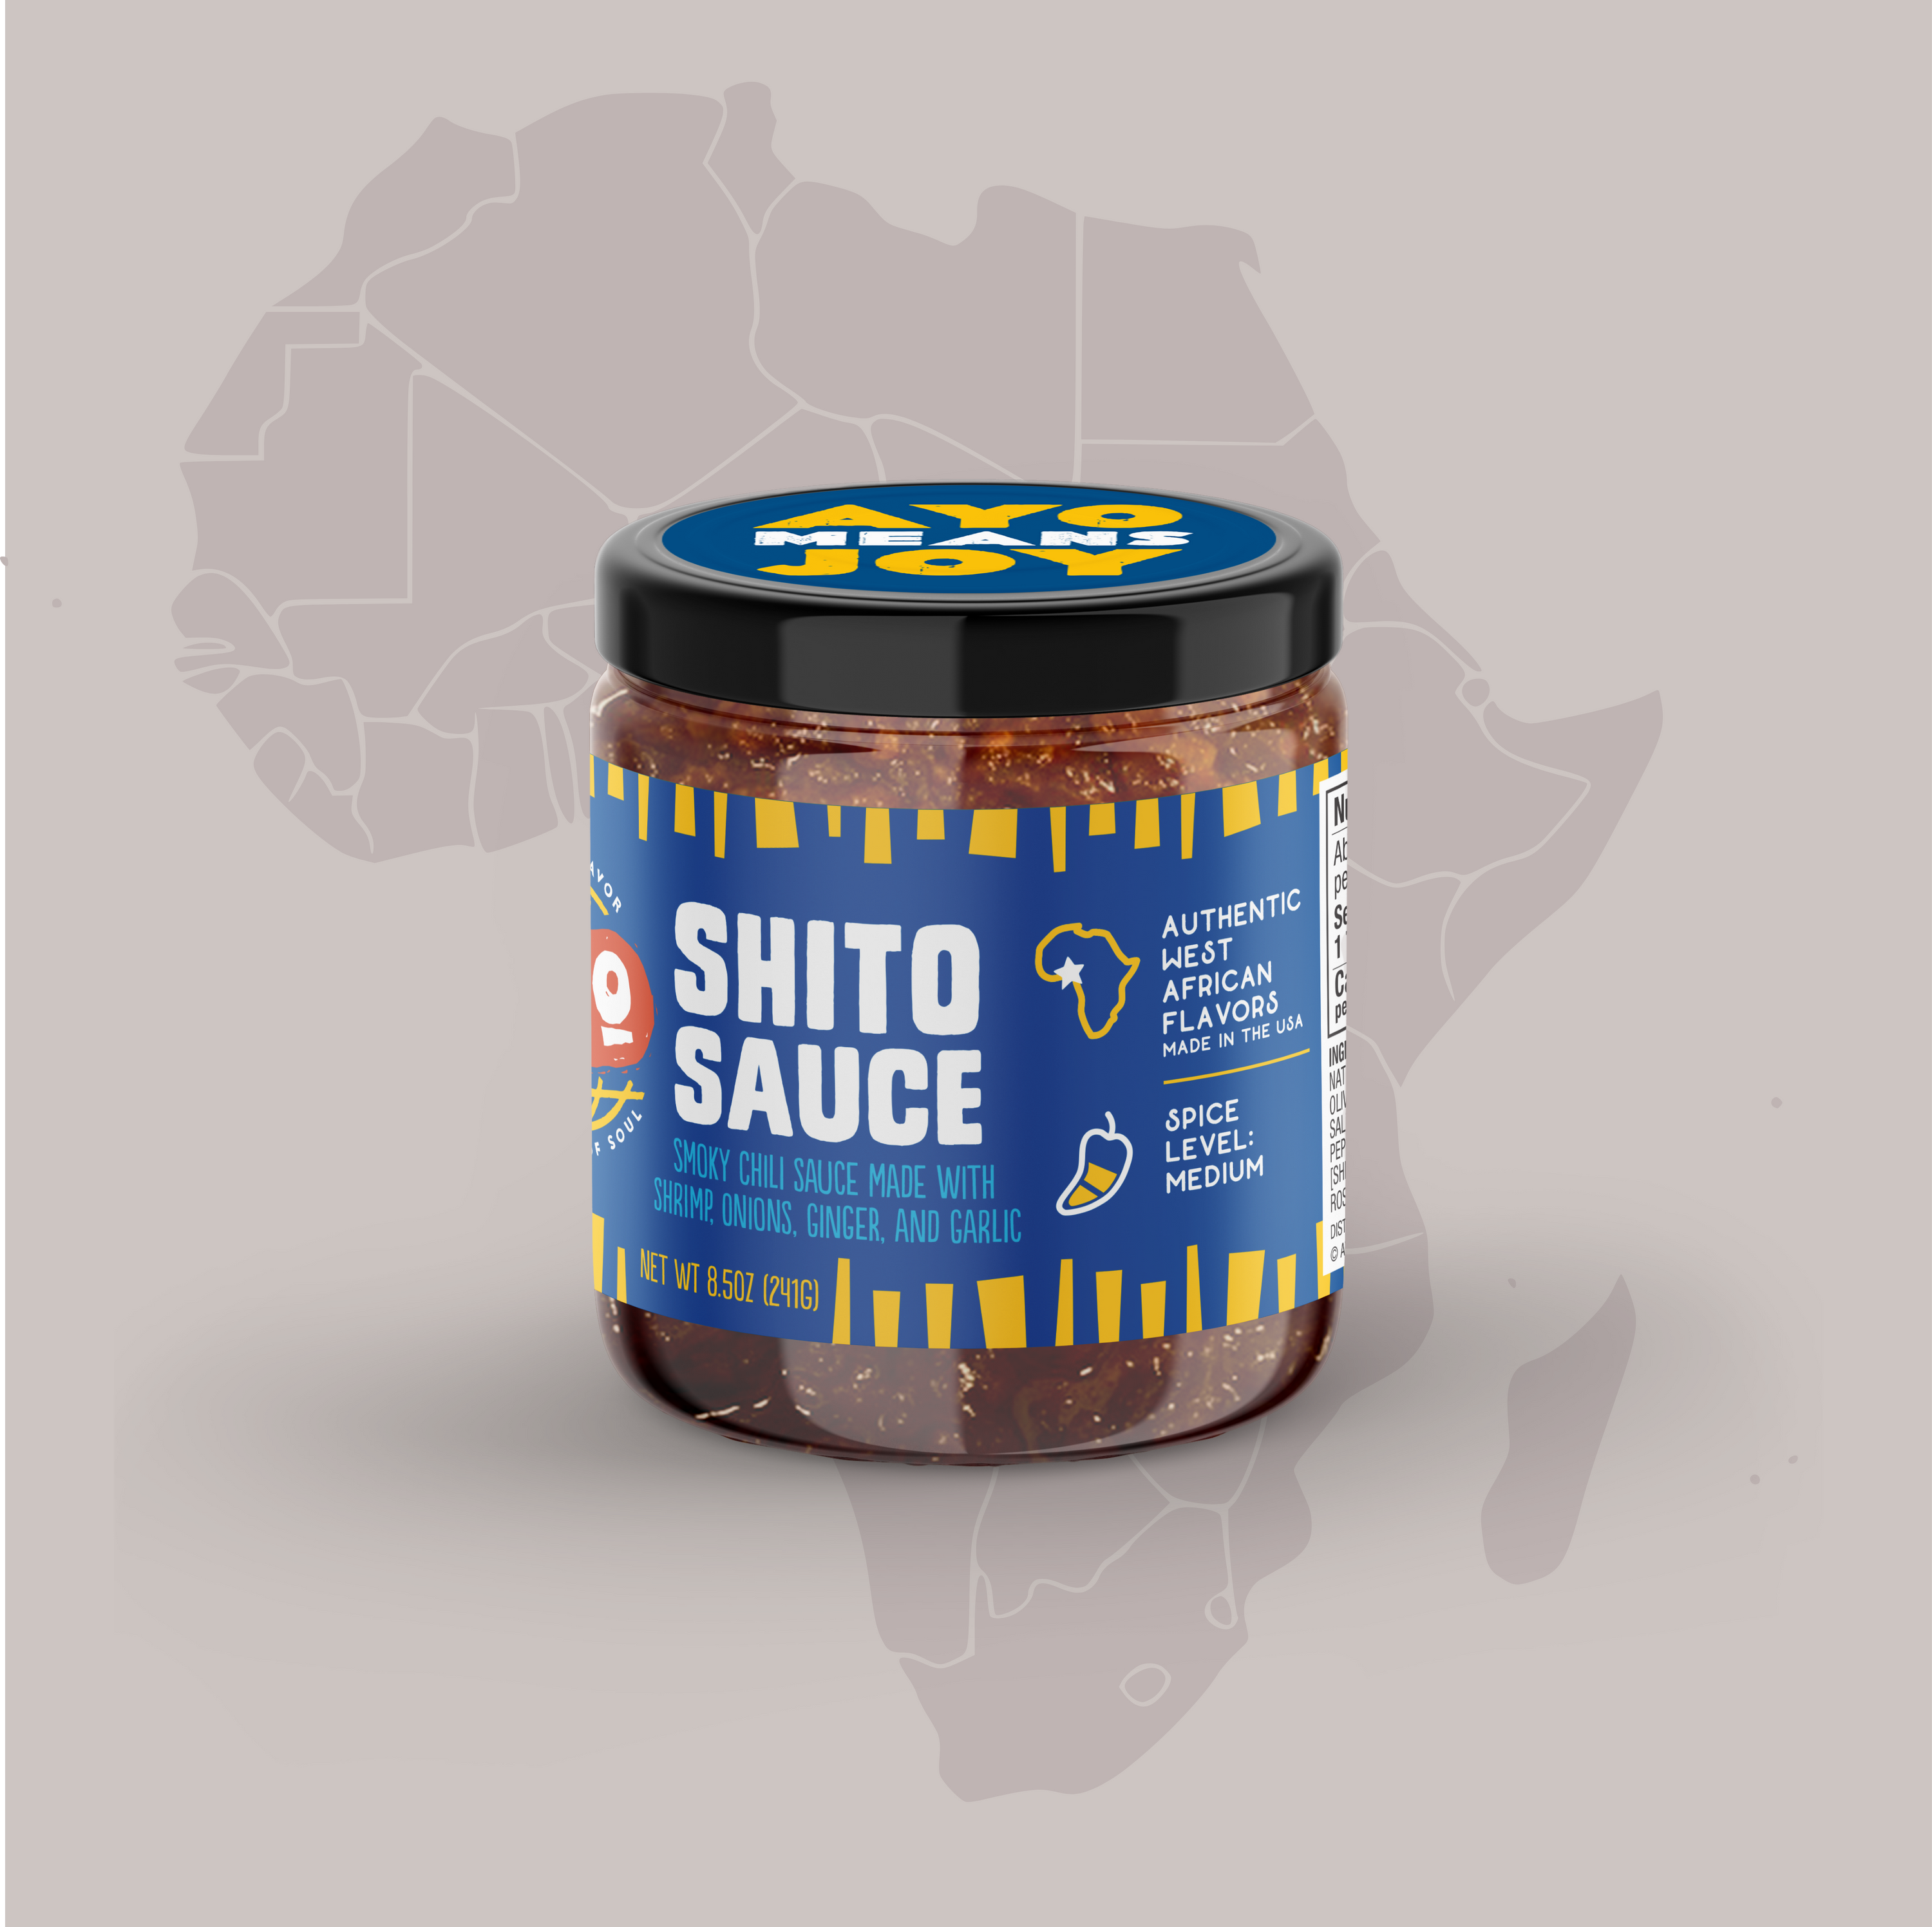 This is How to Make Ghanaian Hot Chilli Sauce 'Shito